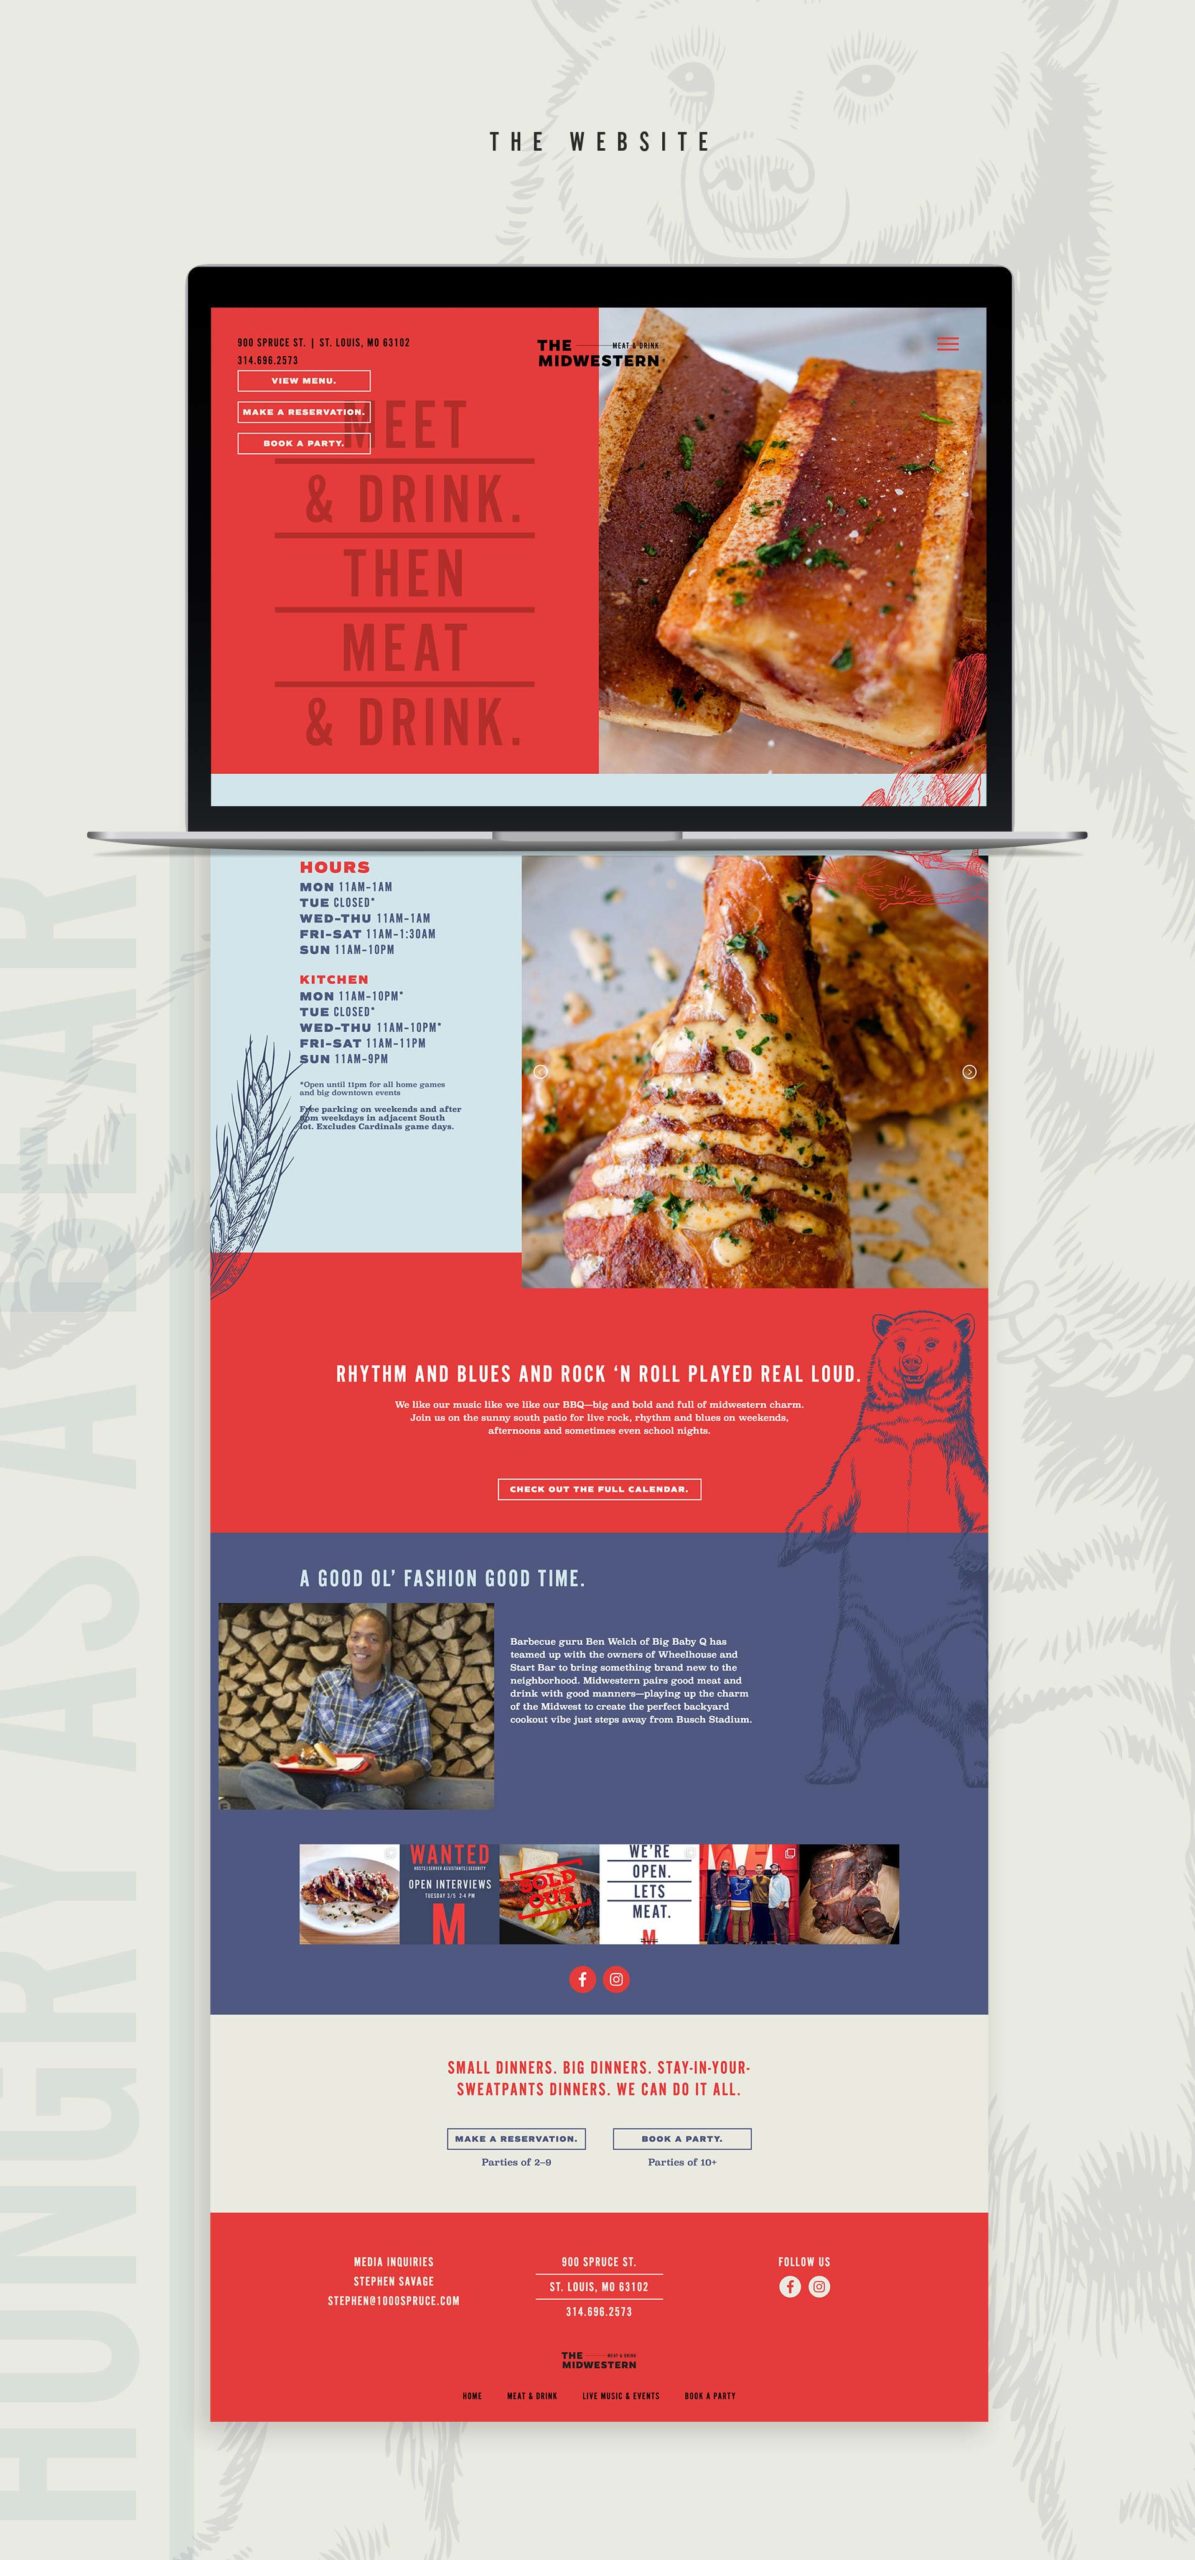 Website design for St. Louis's The MidWestern